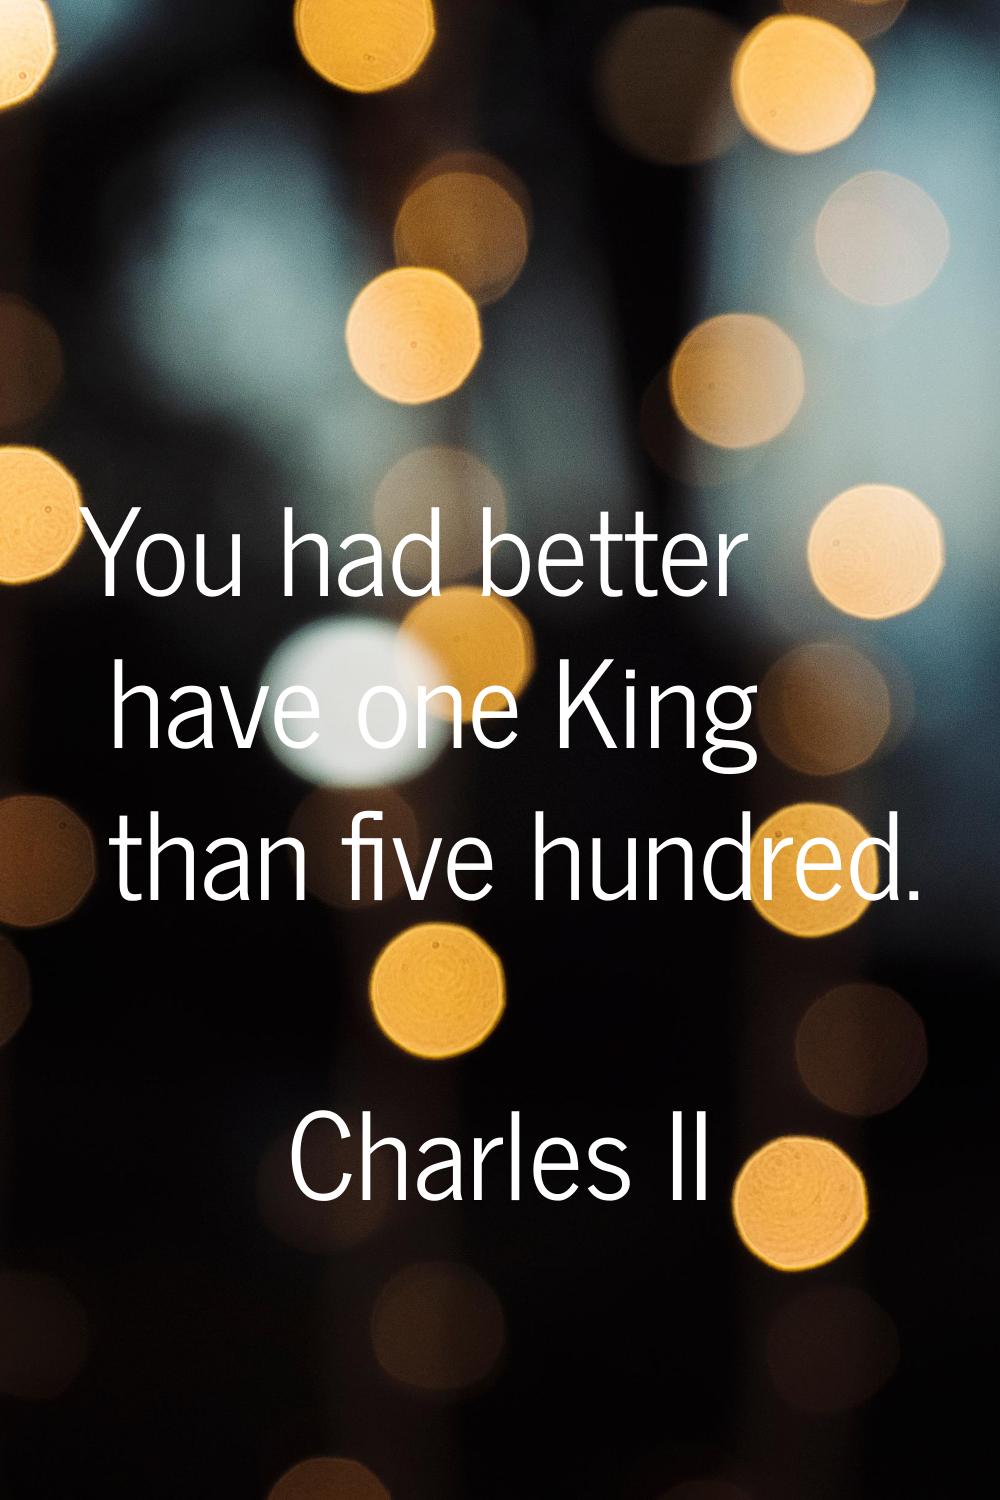 You had better have one King than five hundred.